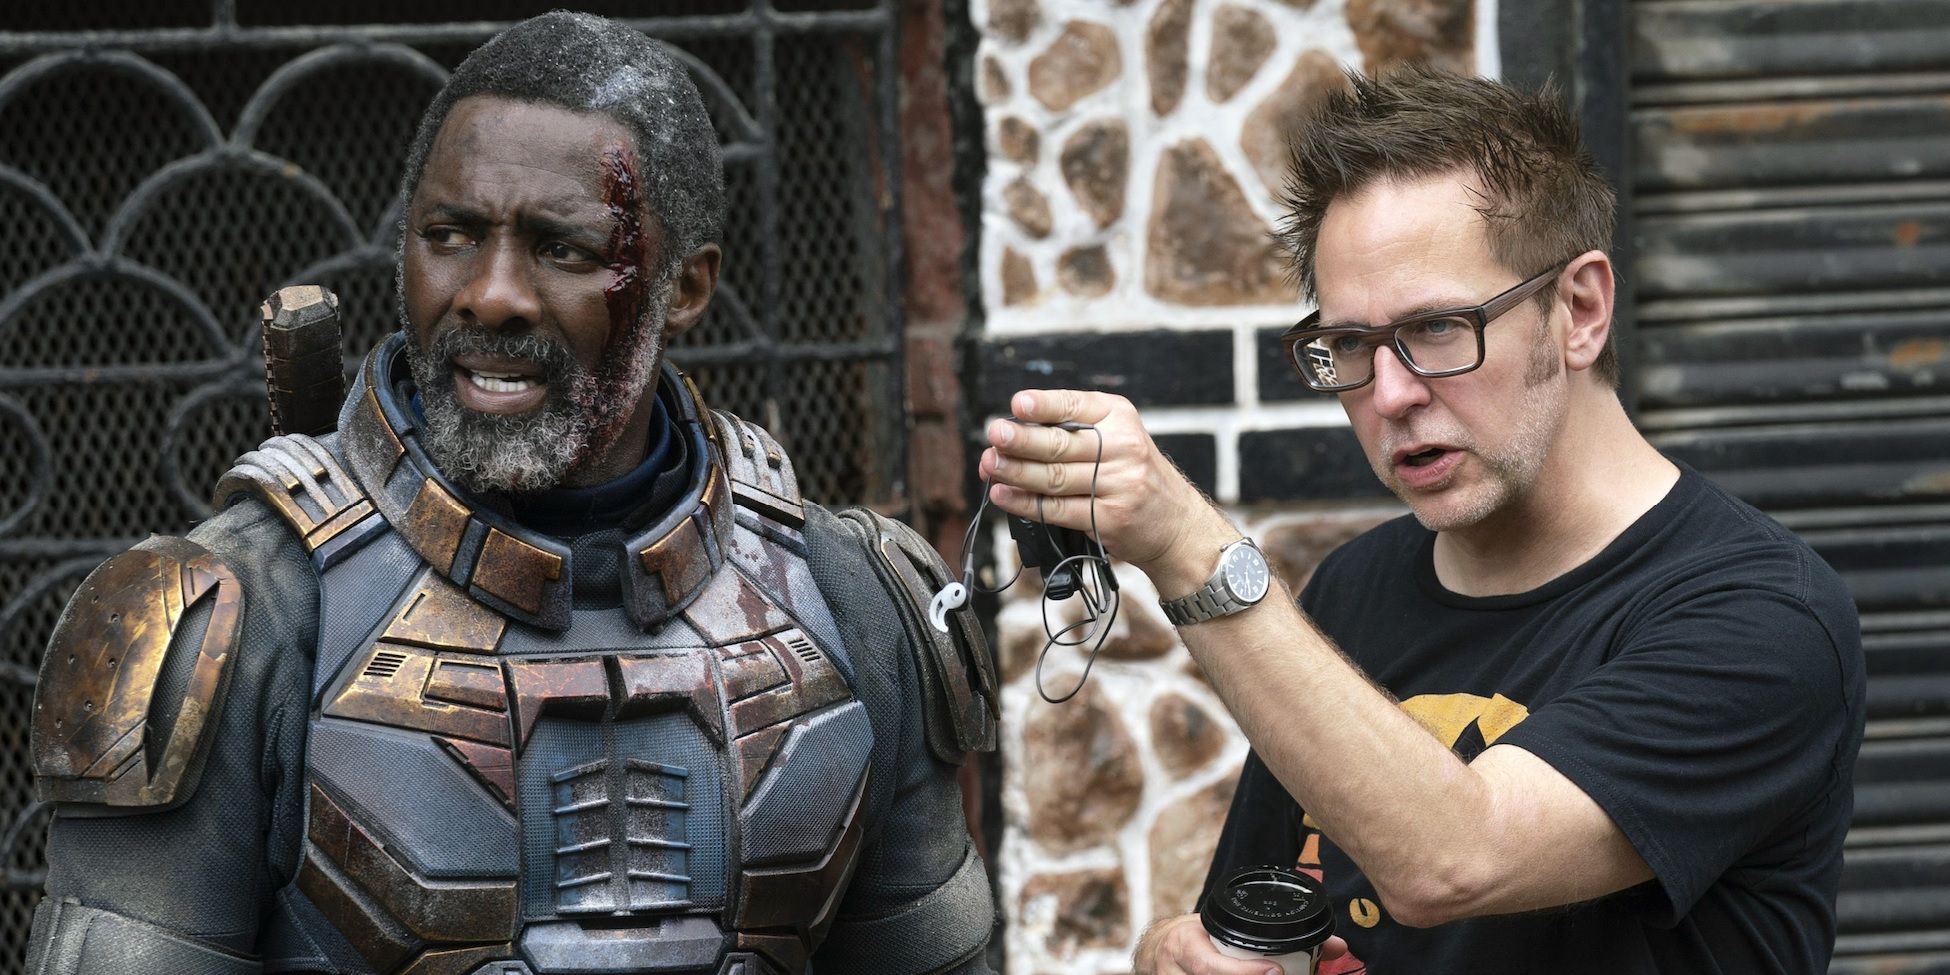 James Gunn on the set of The Suicide Squad with Idris Elba